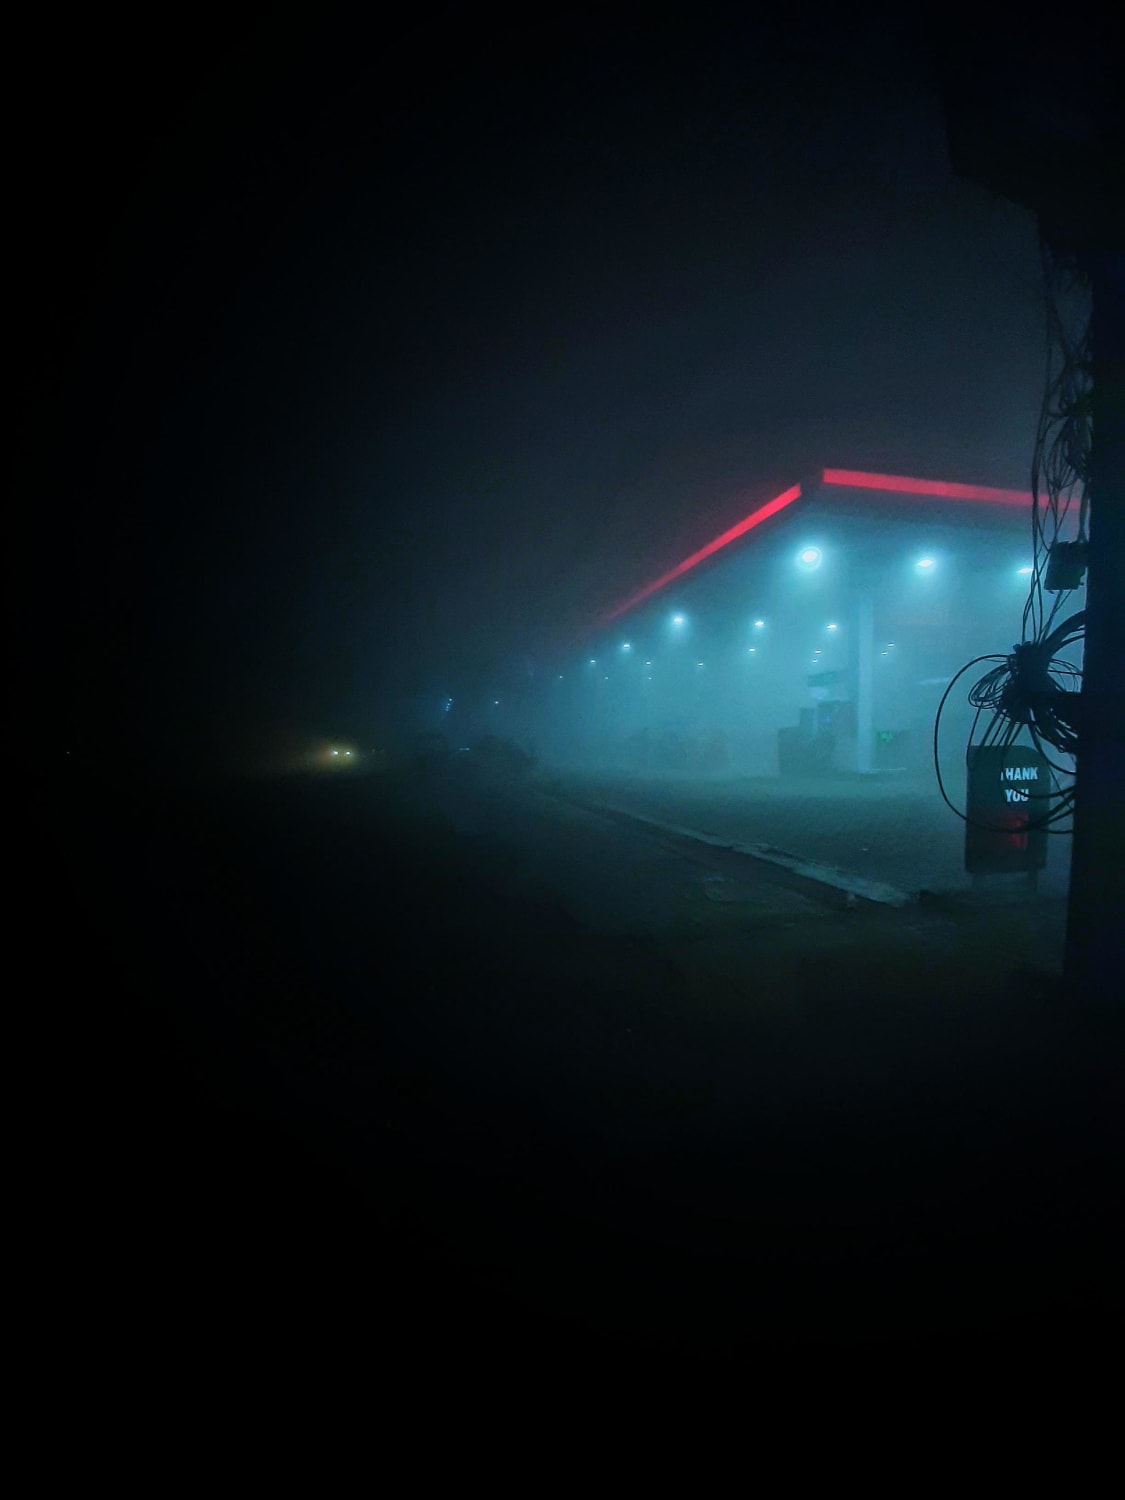 ITAP of a secluded gas station on a foggy night